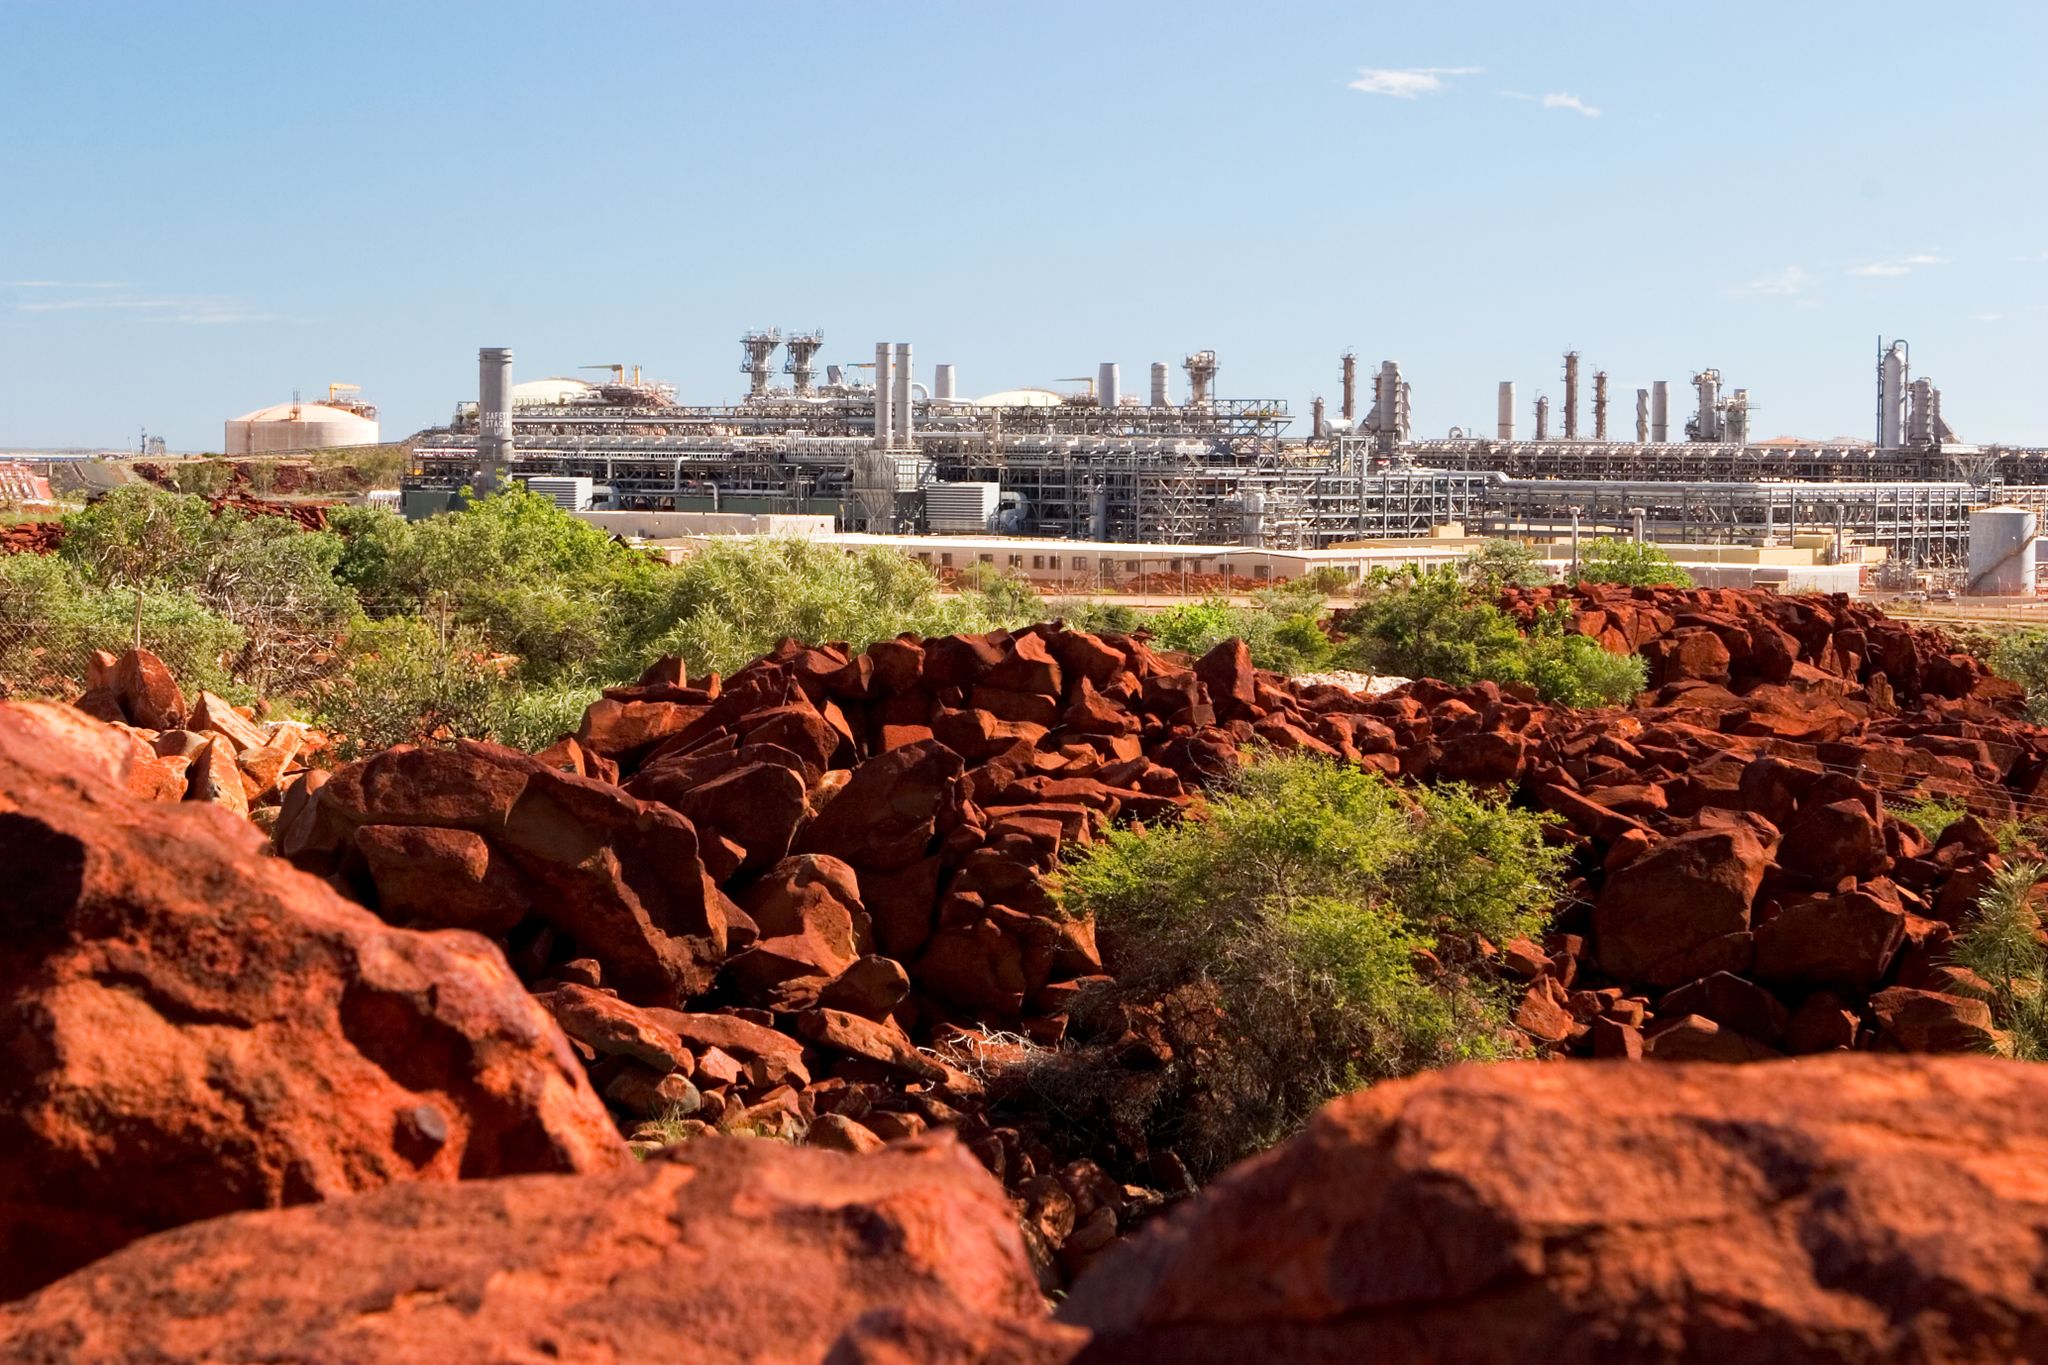 Outdoor image of Karratha Gas Plant